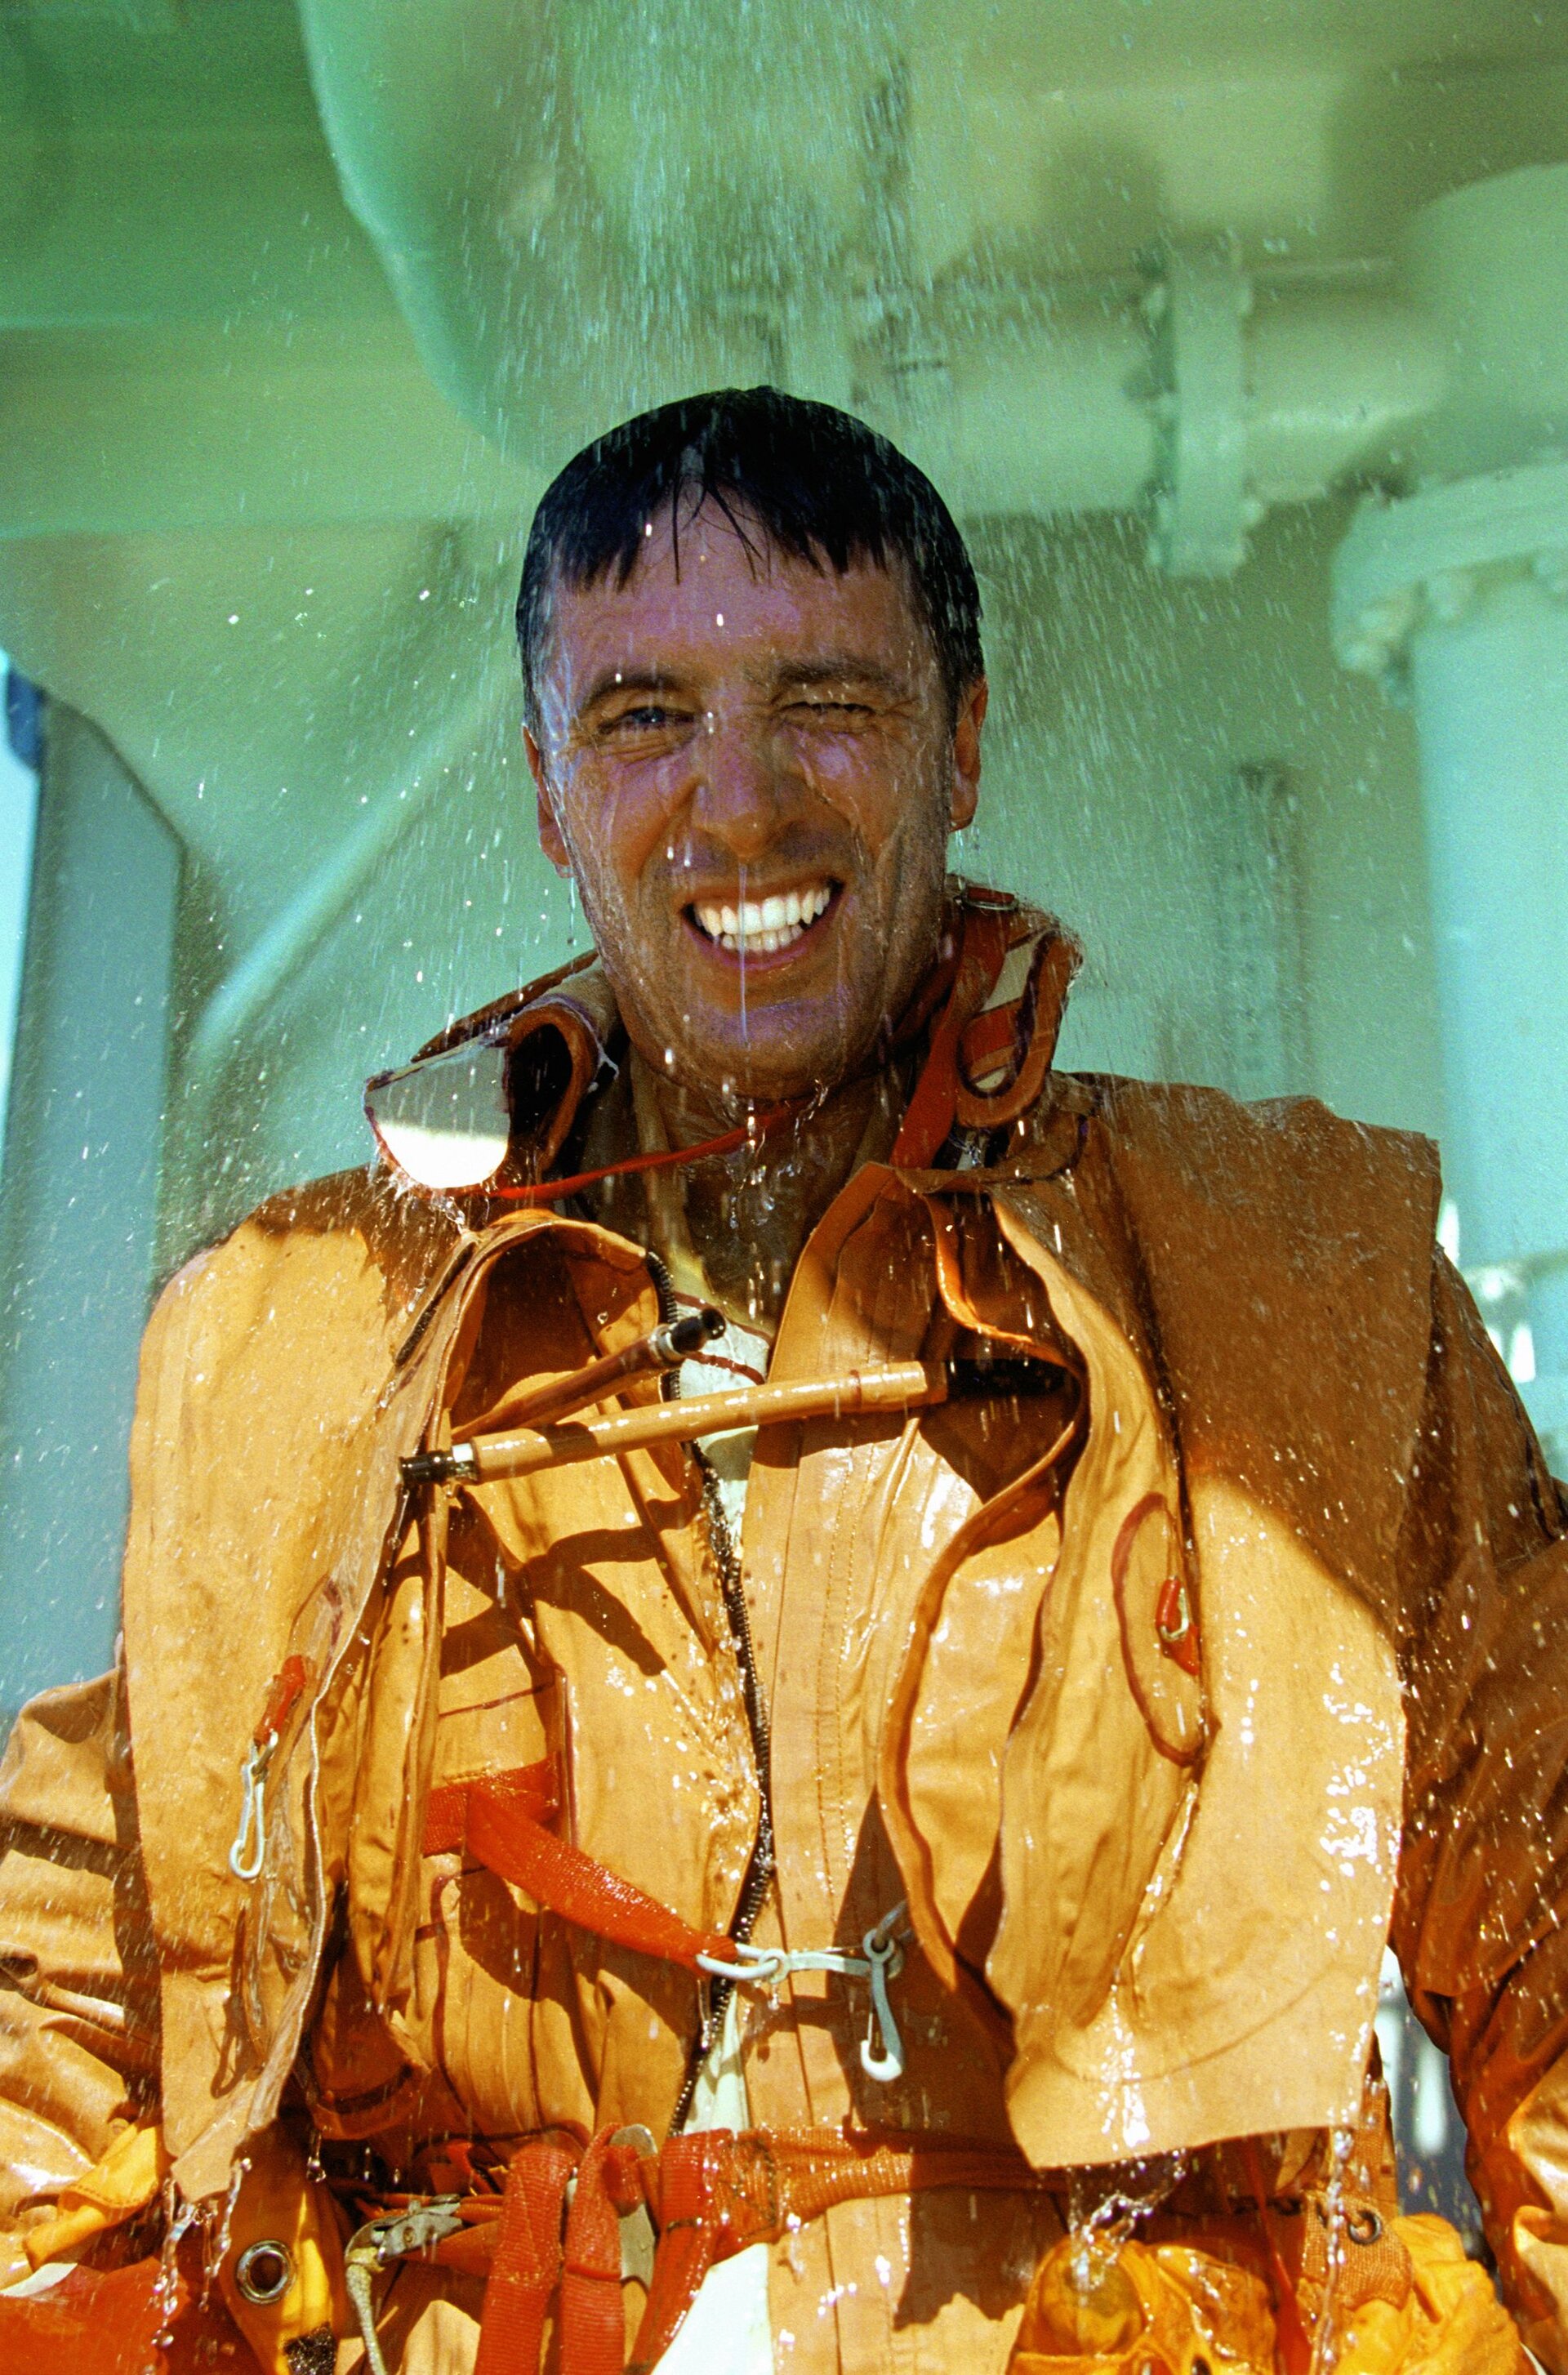 The European astronaut Roberto Vittori during his survival training in Black Sea in November 2001 for the Marco Polo mission.